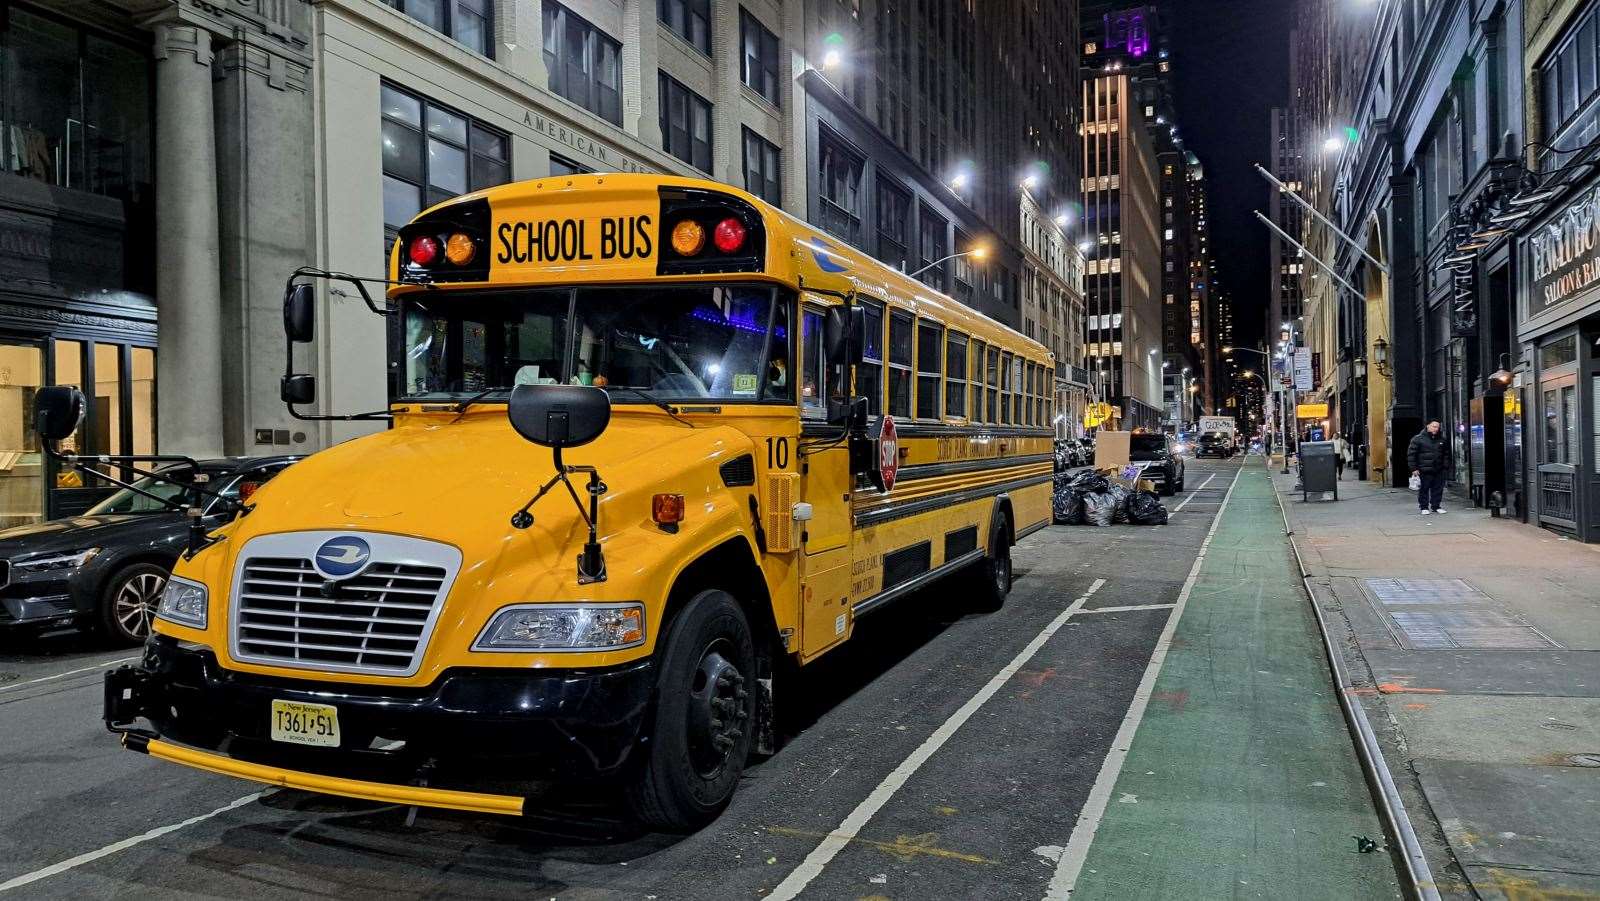 Duncan Meechan, Milton, came fourth in the colour category with New York School Bus – a very striking image where the bus filled most of the frame but the street added perspective away into the distance.